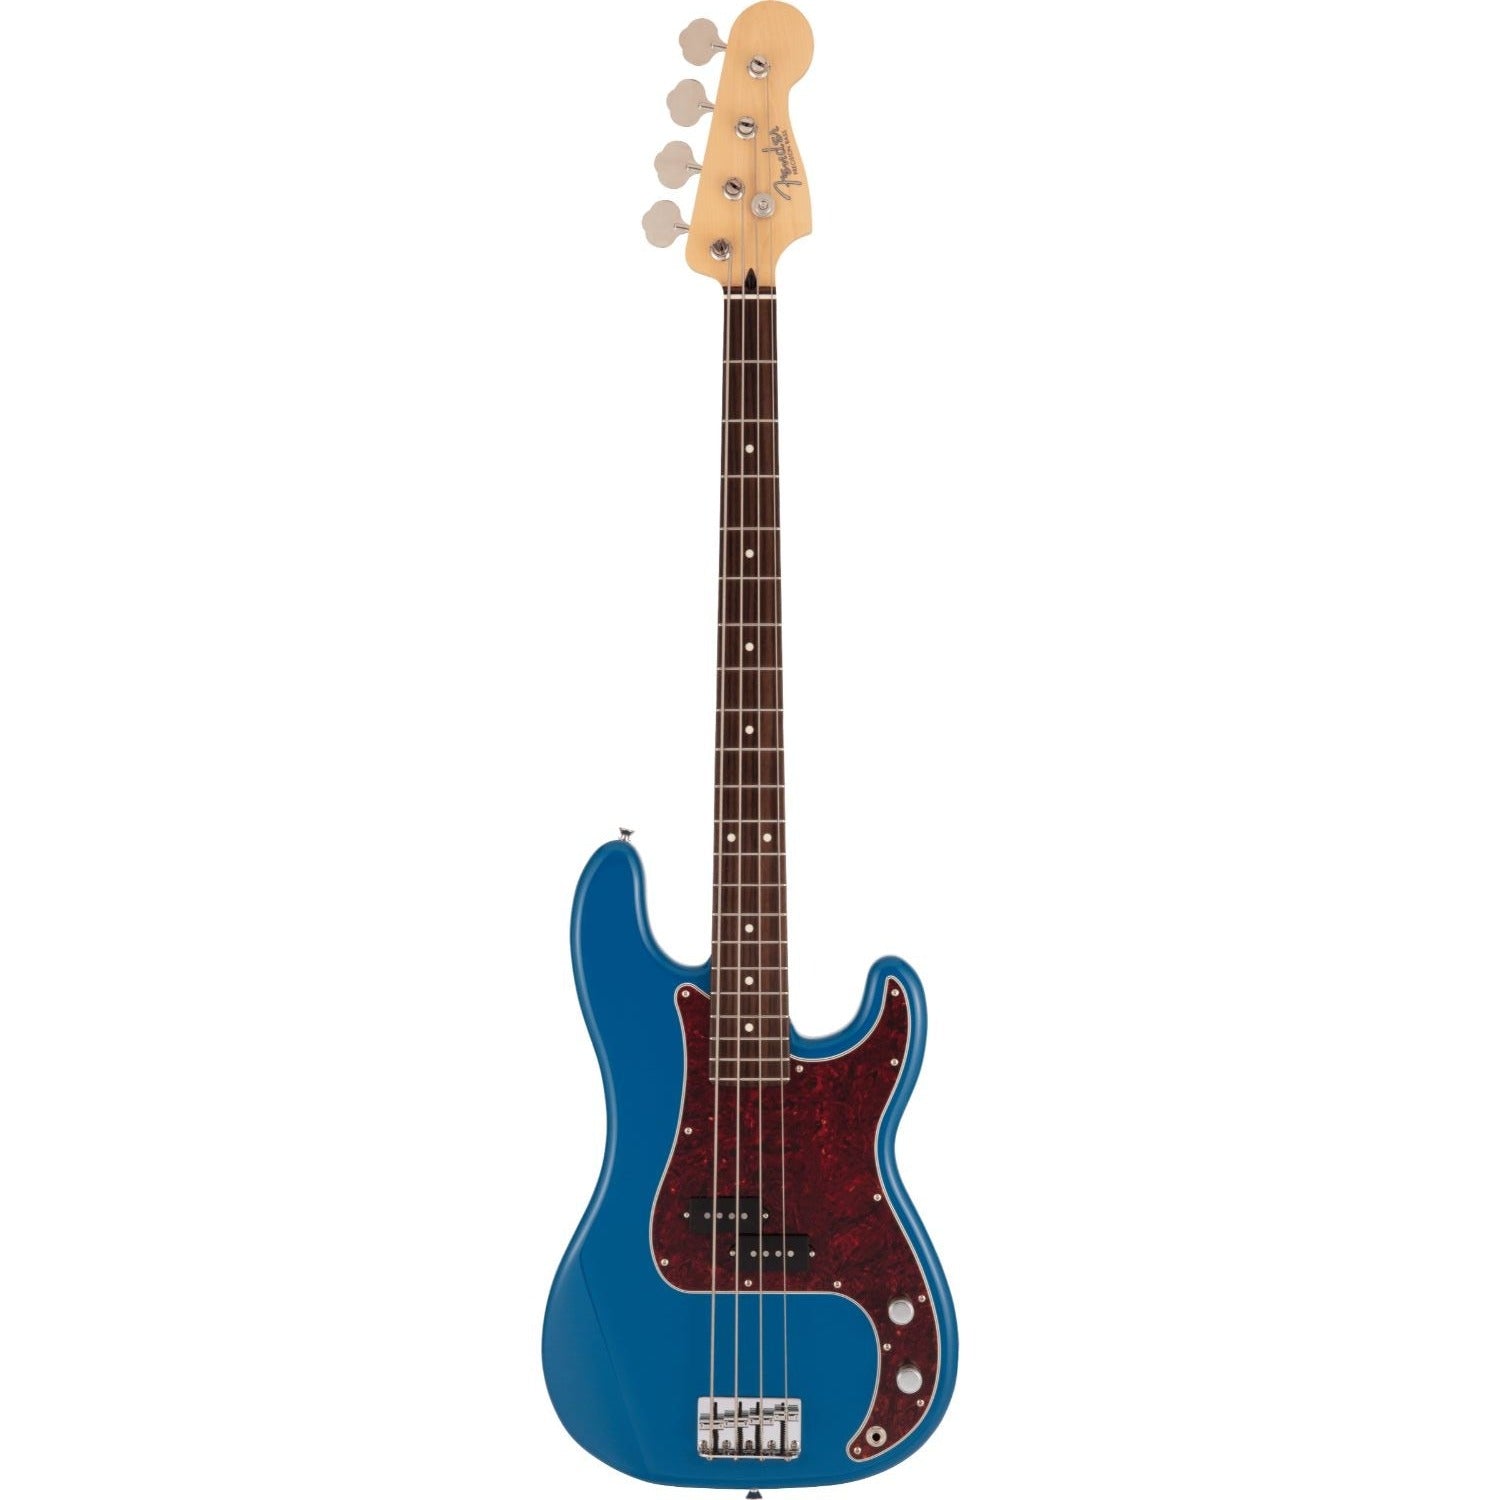 Fender Made in Japan Hybrid II Precision Bass, Forest Blue